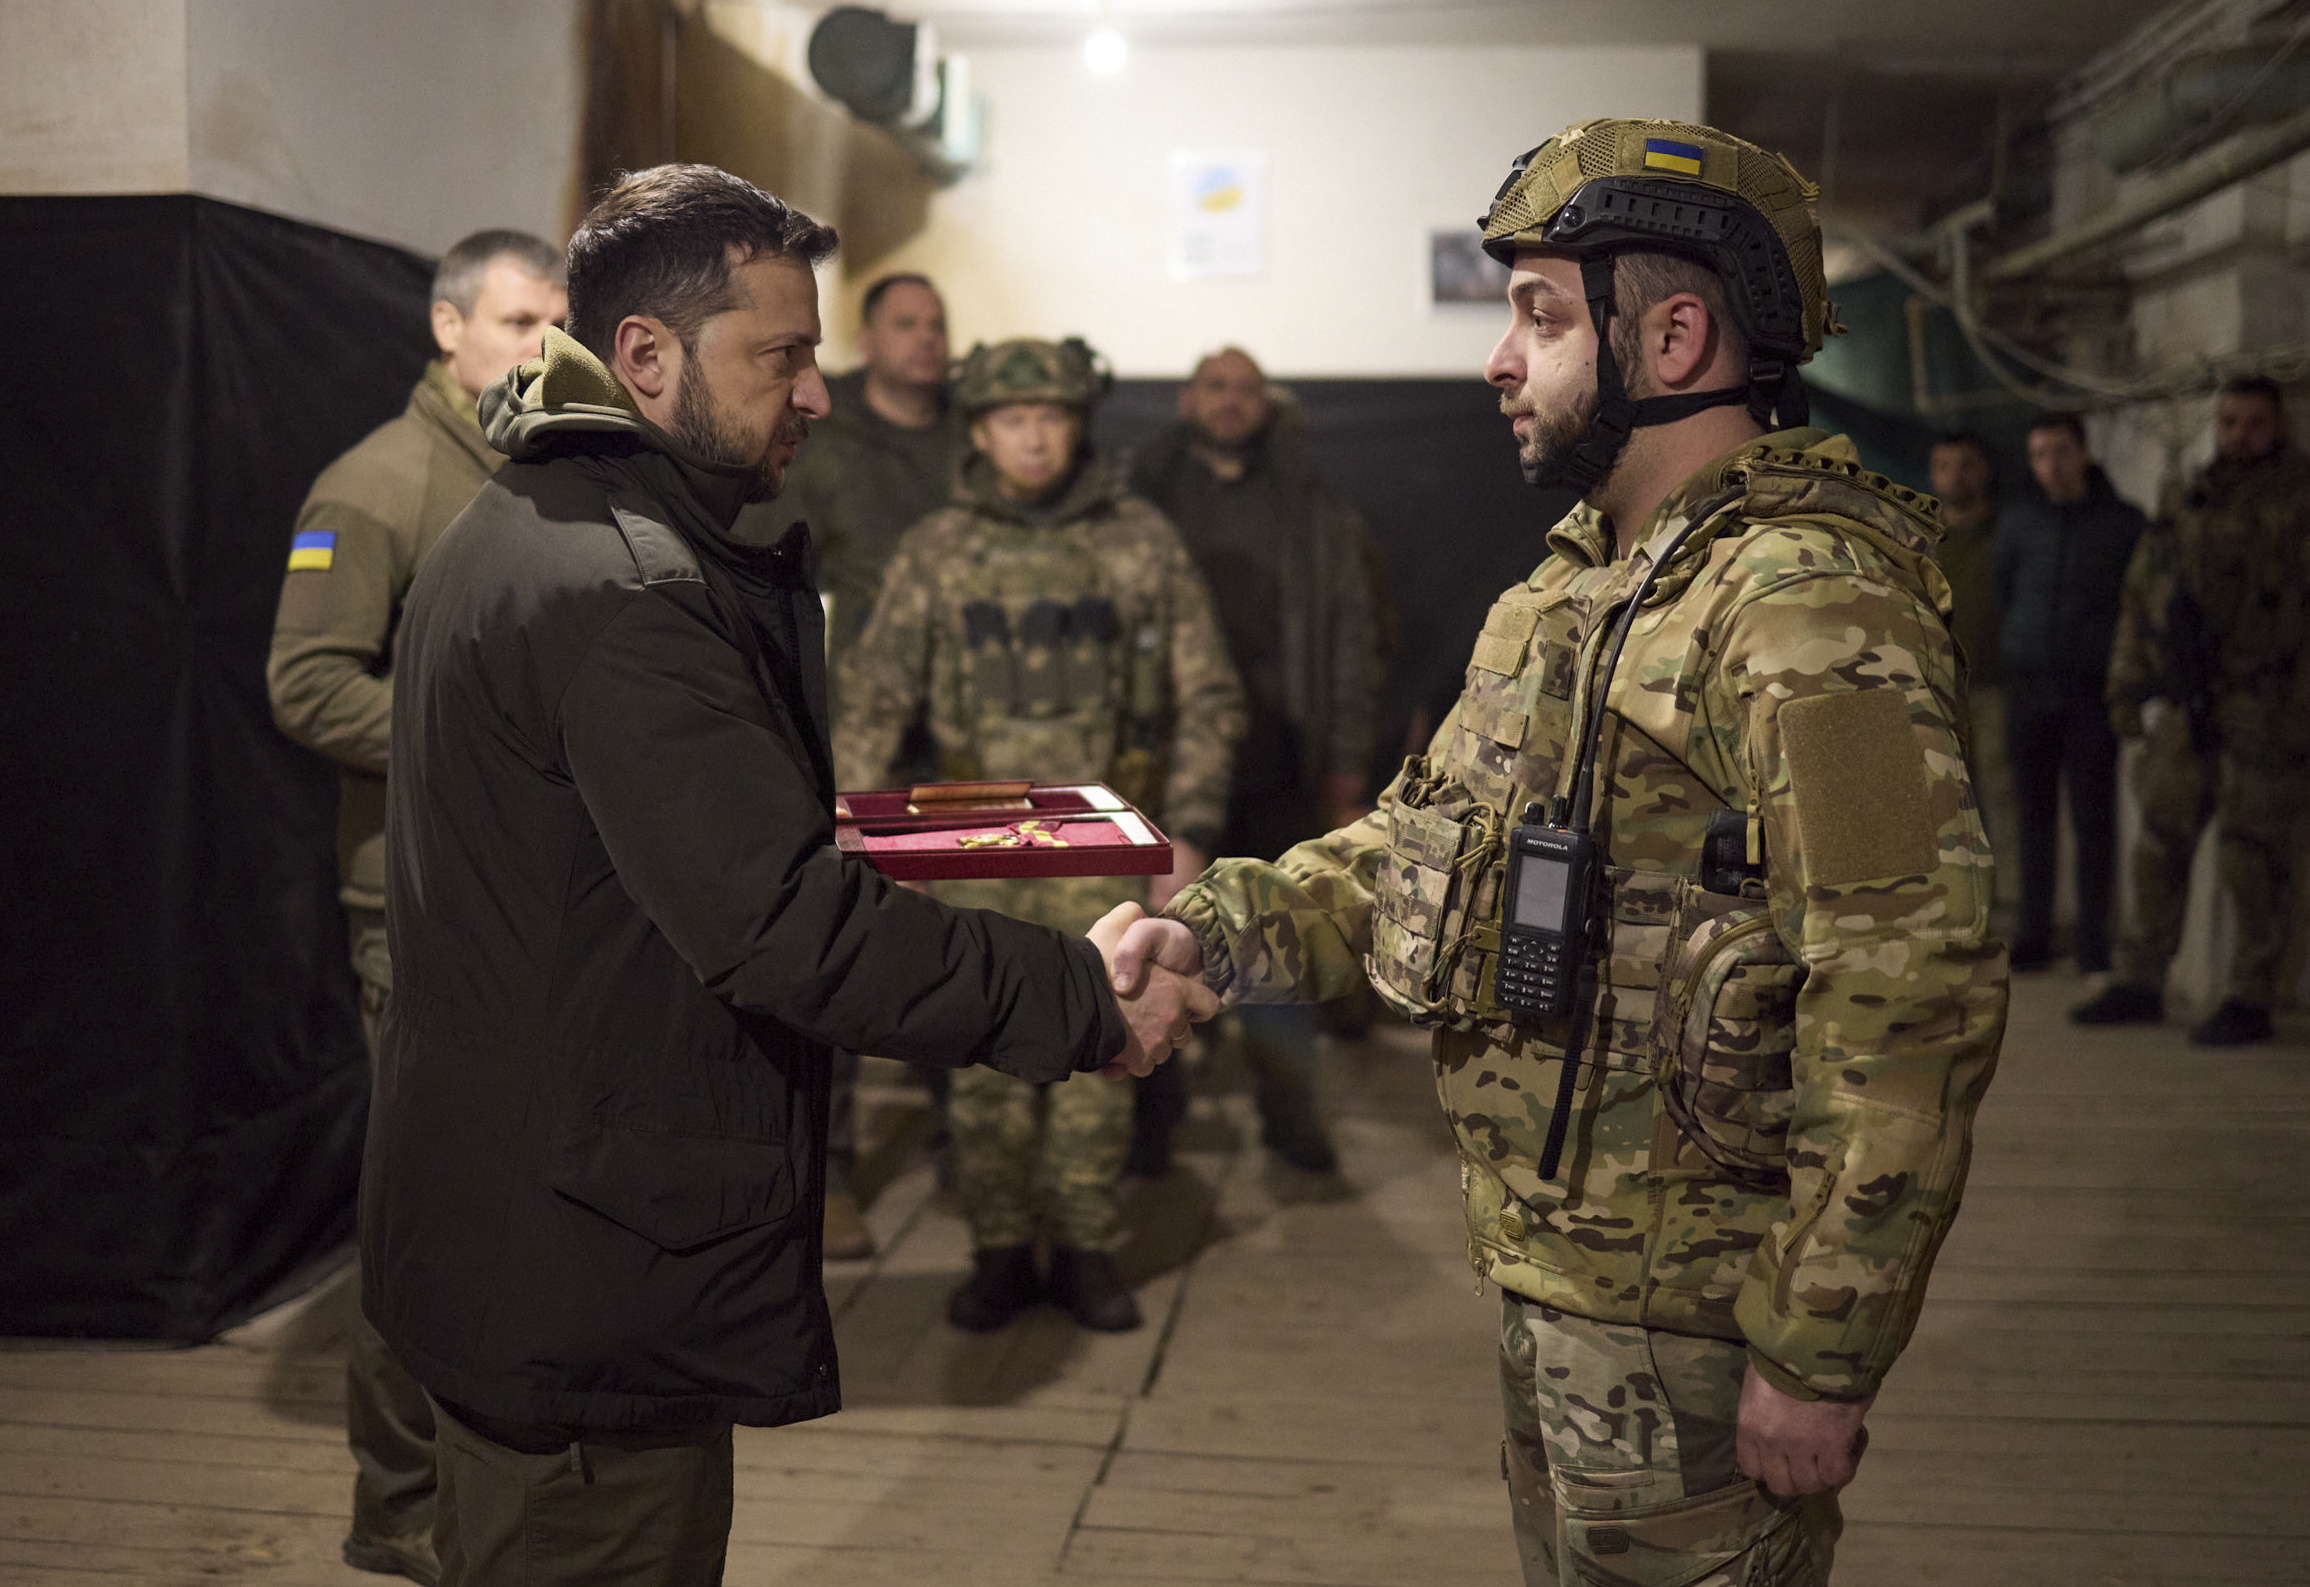 epa11003553 A handout photo made available by the presidential press service shows Ukrainian President Volodymyr Zelensky (L) handing an award to a serviceman at the headquarters of the Defense Forces near a frontline close to Kupiansk during his working trip to Kharkiv region, Ukraine, 30 November 2023 amid the Russian invasion. Volodymyr Zelenskyy and Defense Minister Rustem Umerov listened to a report on the operational situation in that area and hand State awards to Ukrainian servicemen.  EPA/PRESIDENTIAL PRESS SERVICE HANDOUT HANDOUT 36225 HANDOUT EDITORIAL USE ONLY/NO SALES HANDOUT EDITORIAL USE ONLY/NO SALES